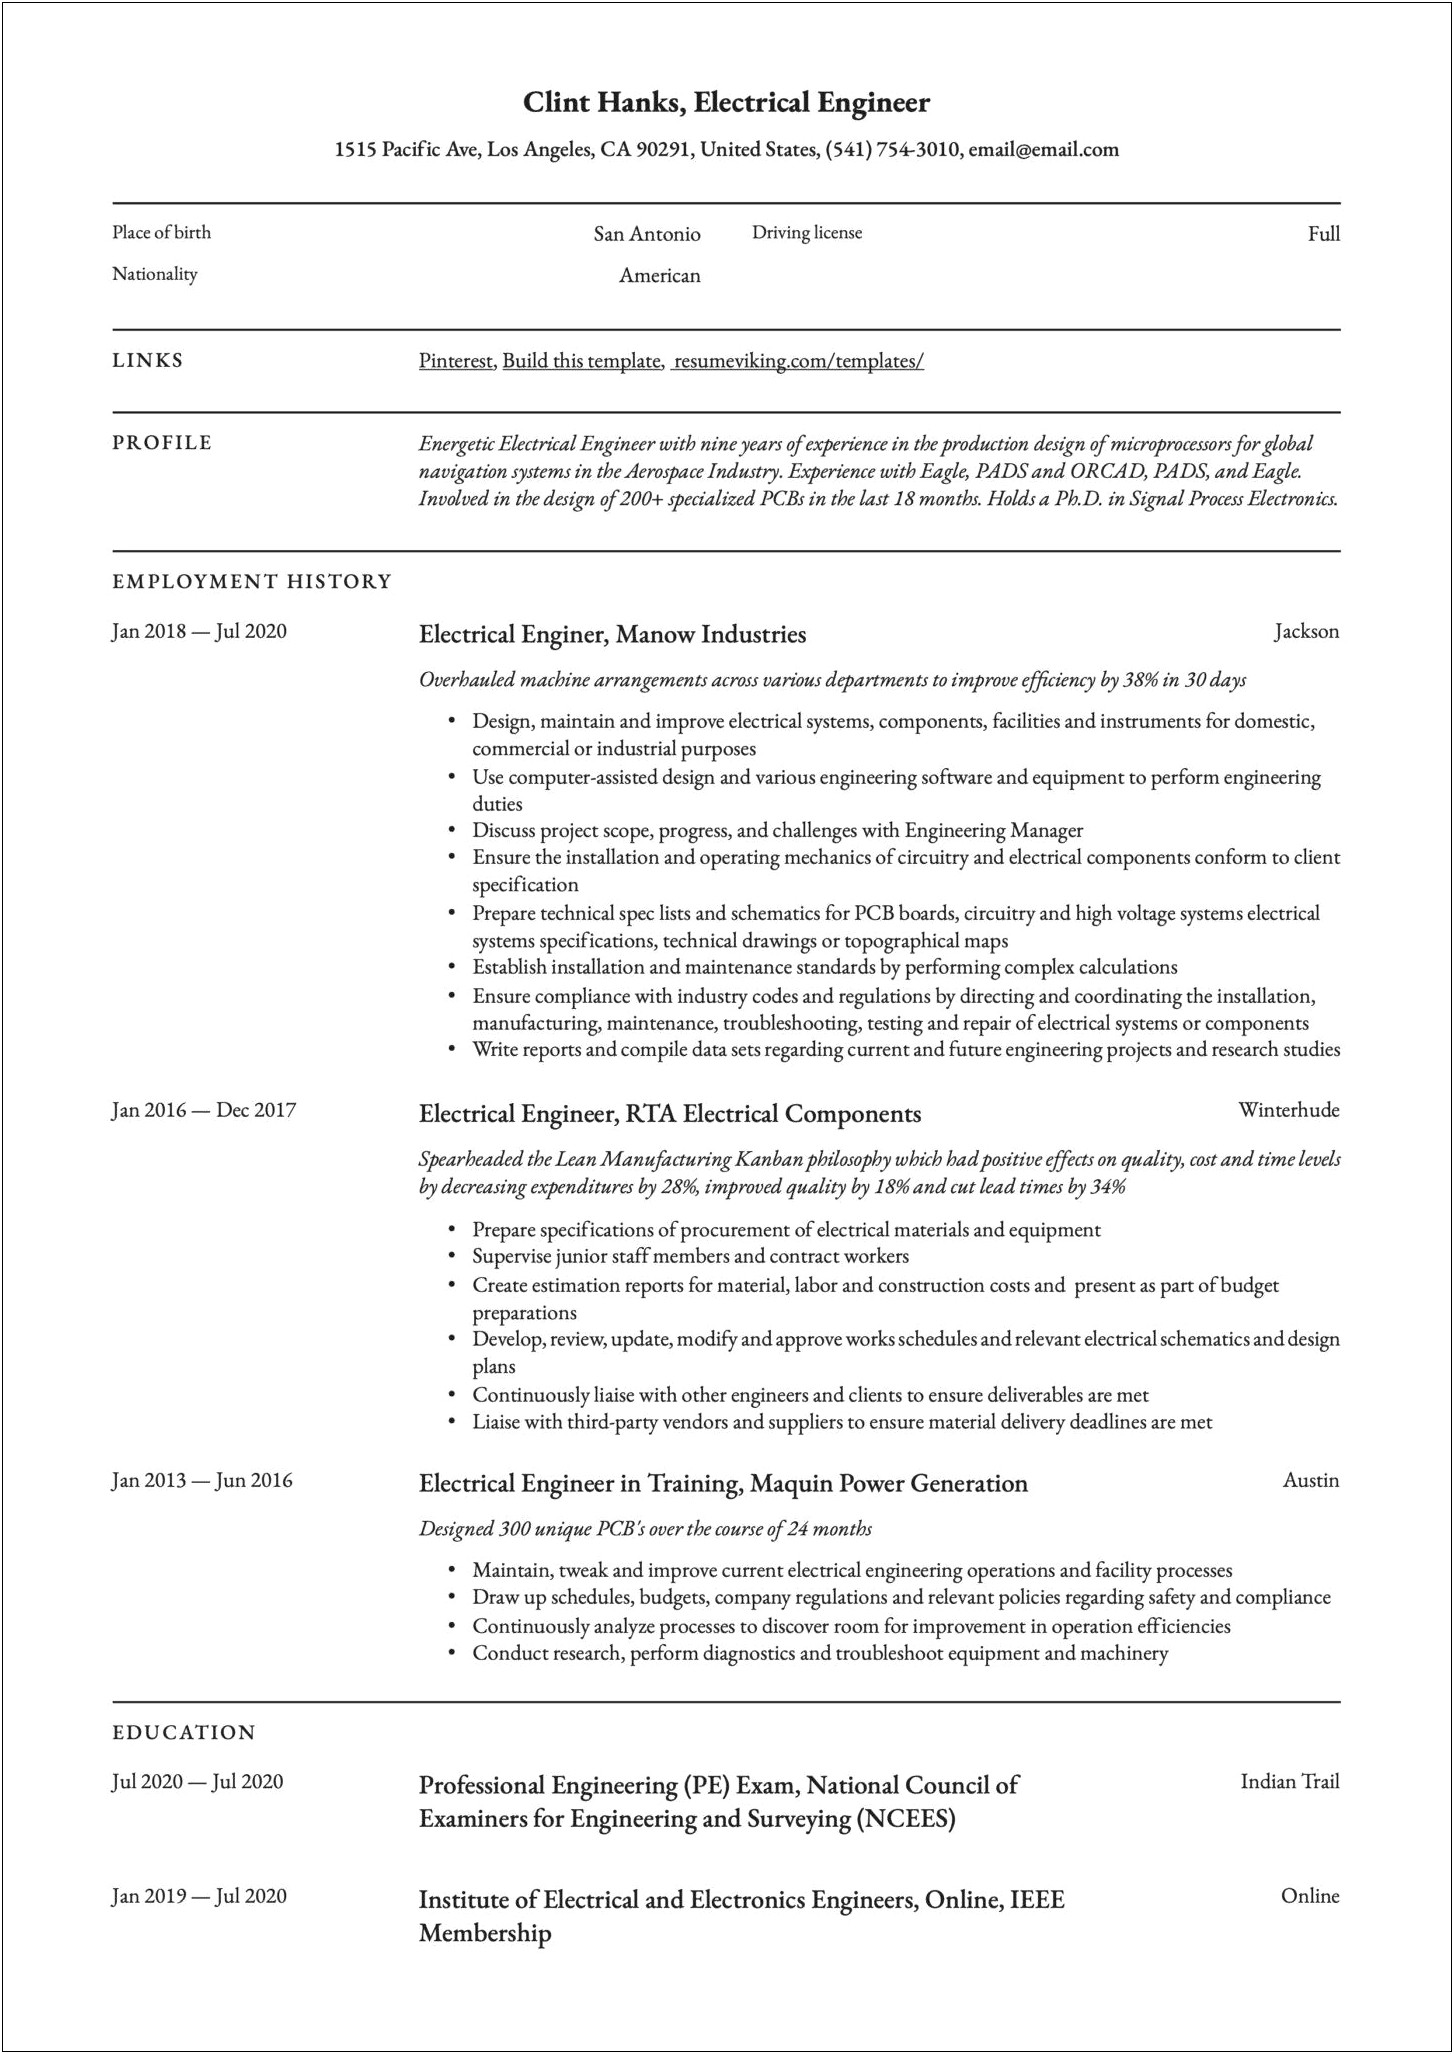 Examples Of Relevant Coursework In Resume Engineering